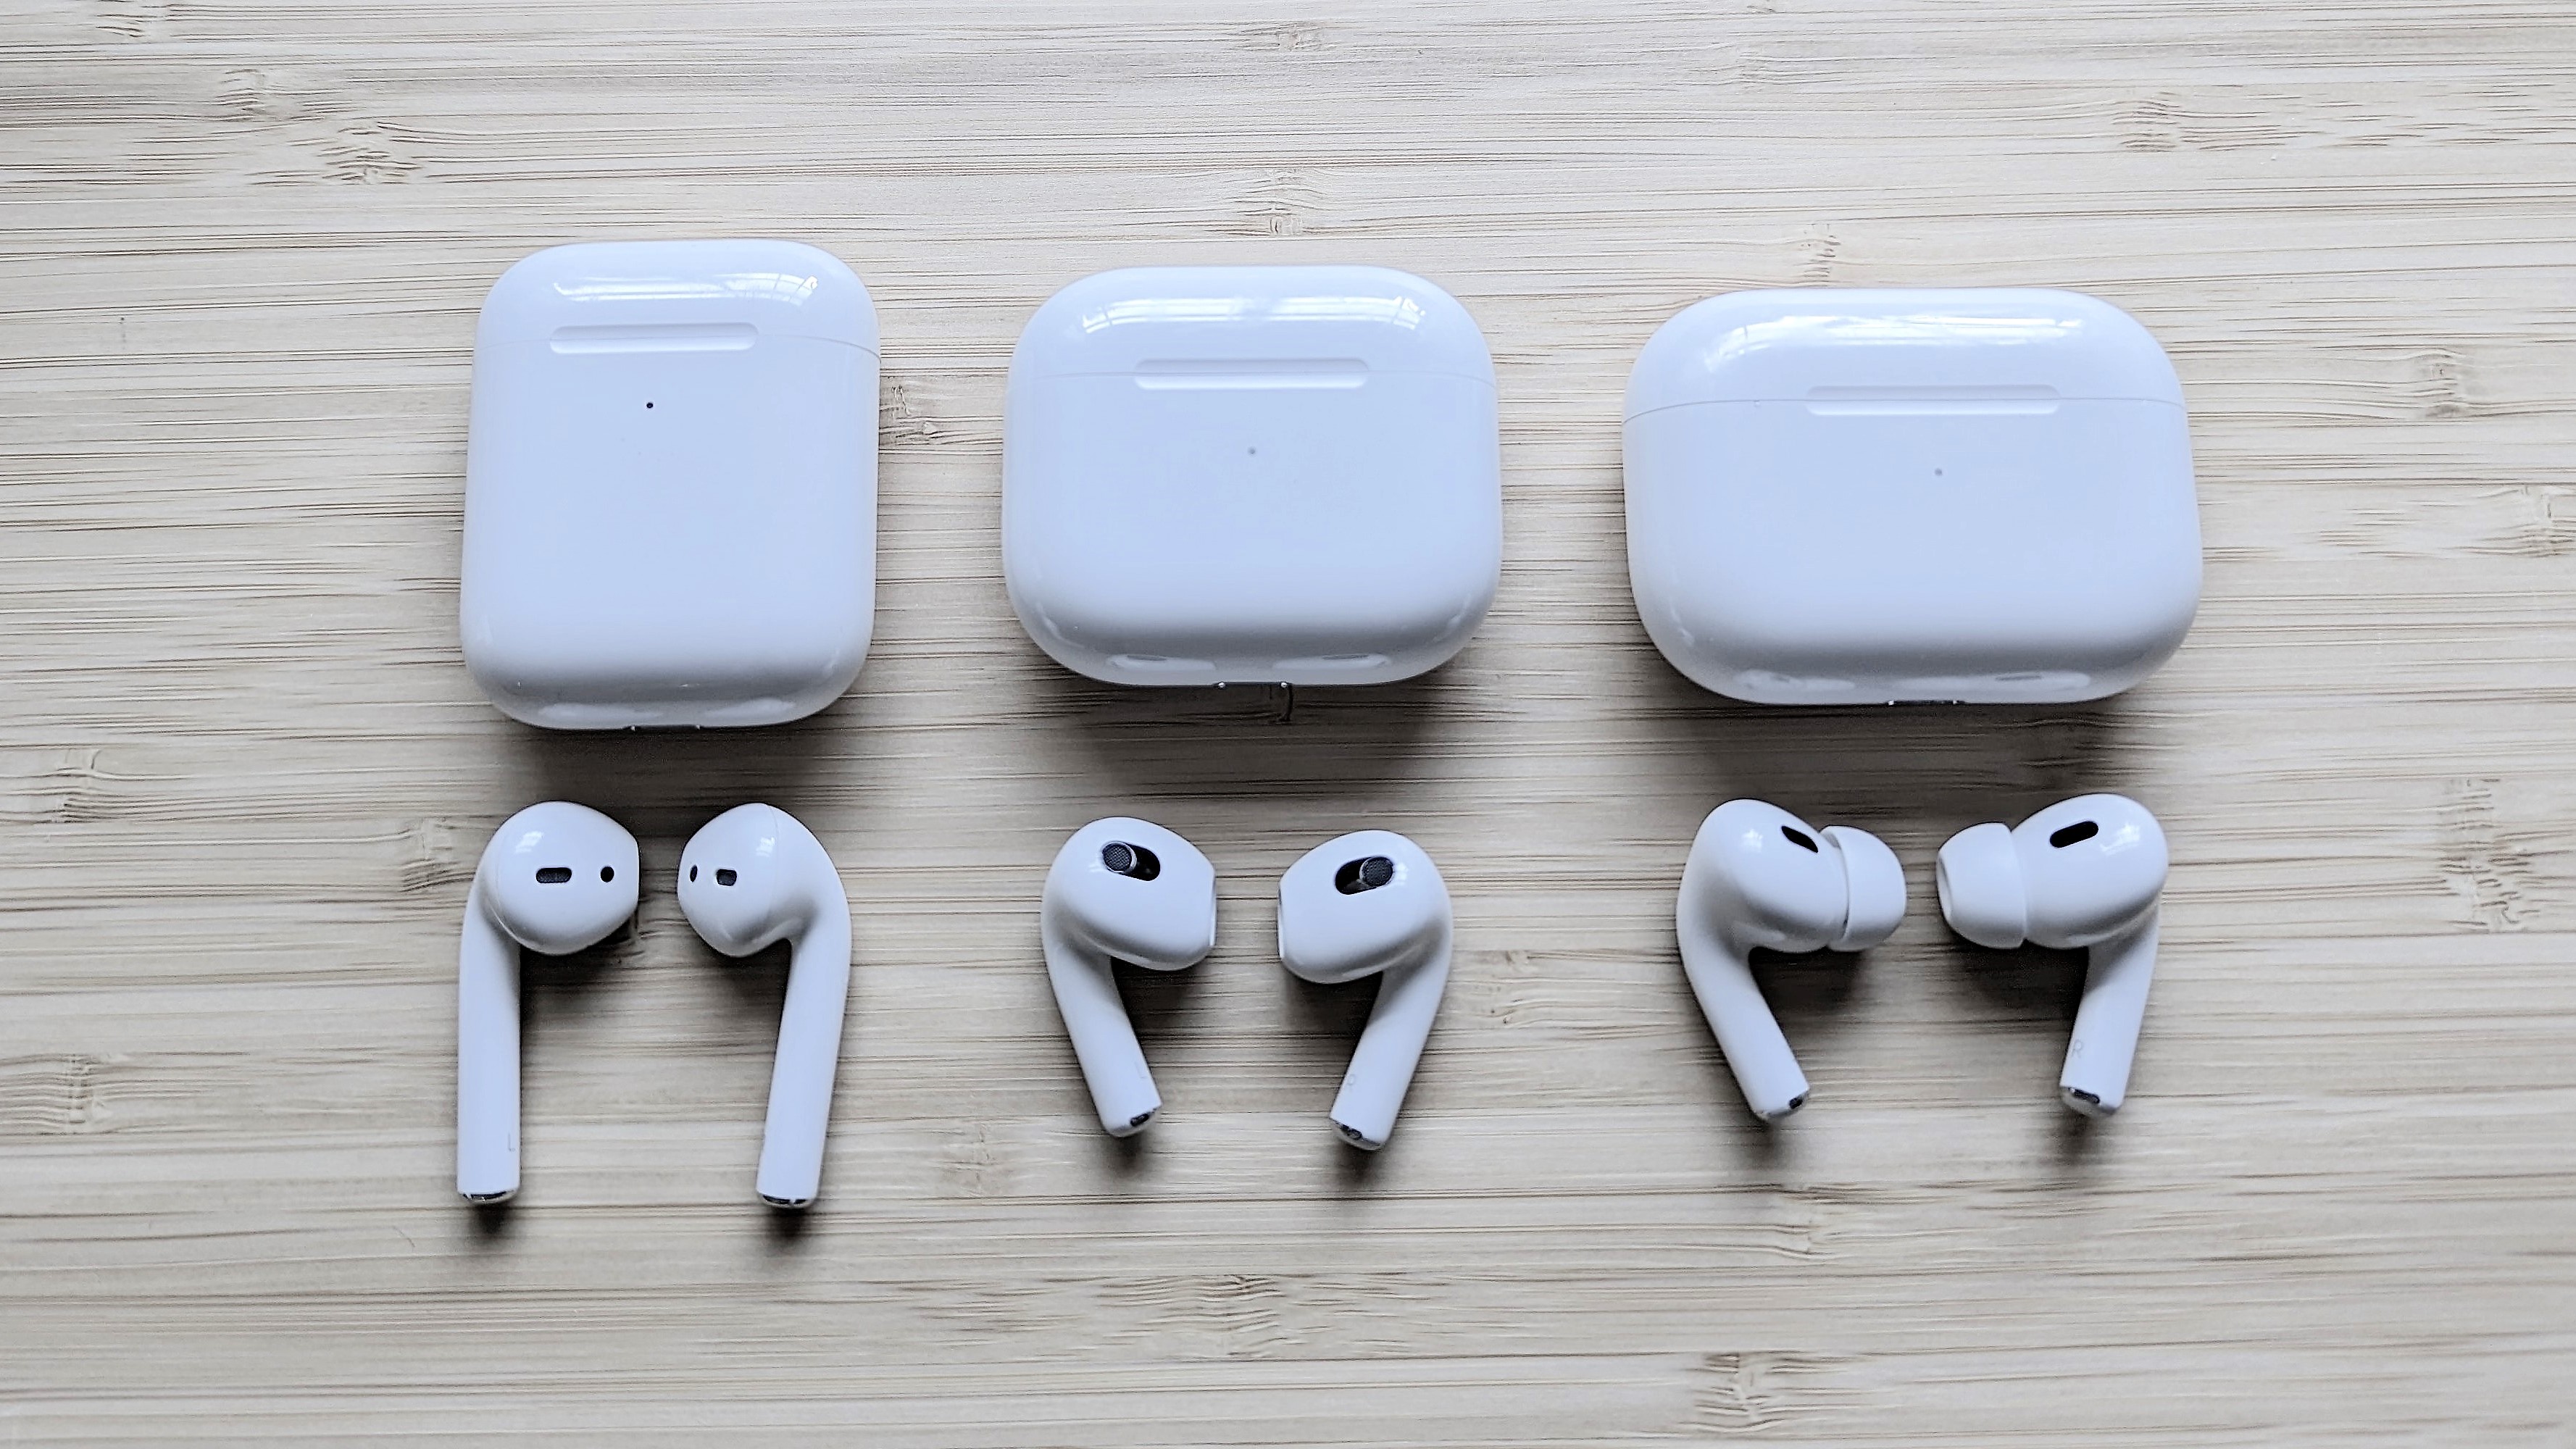 3 AirPods models lined up with charging cases on a wooden surface